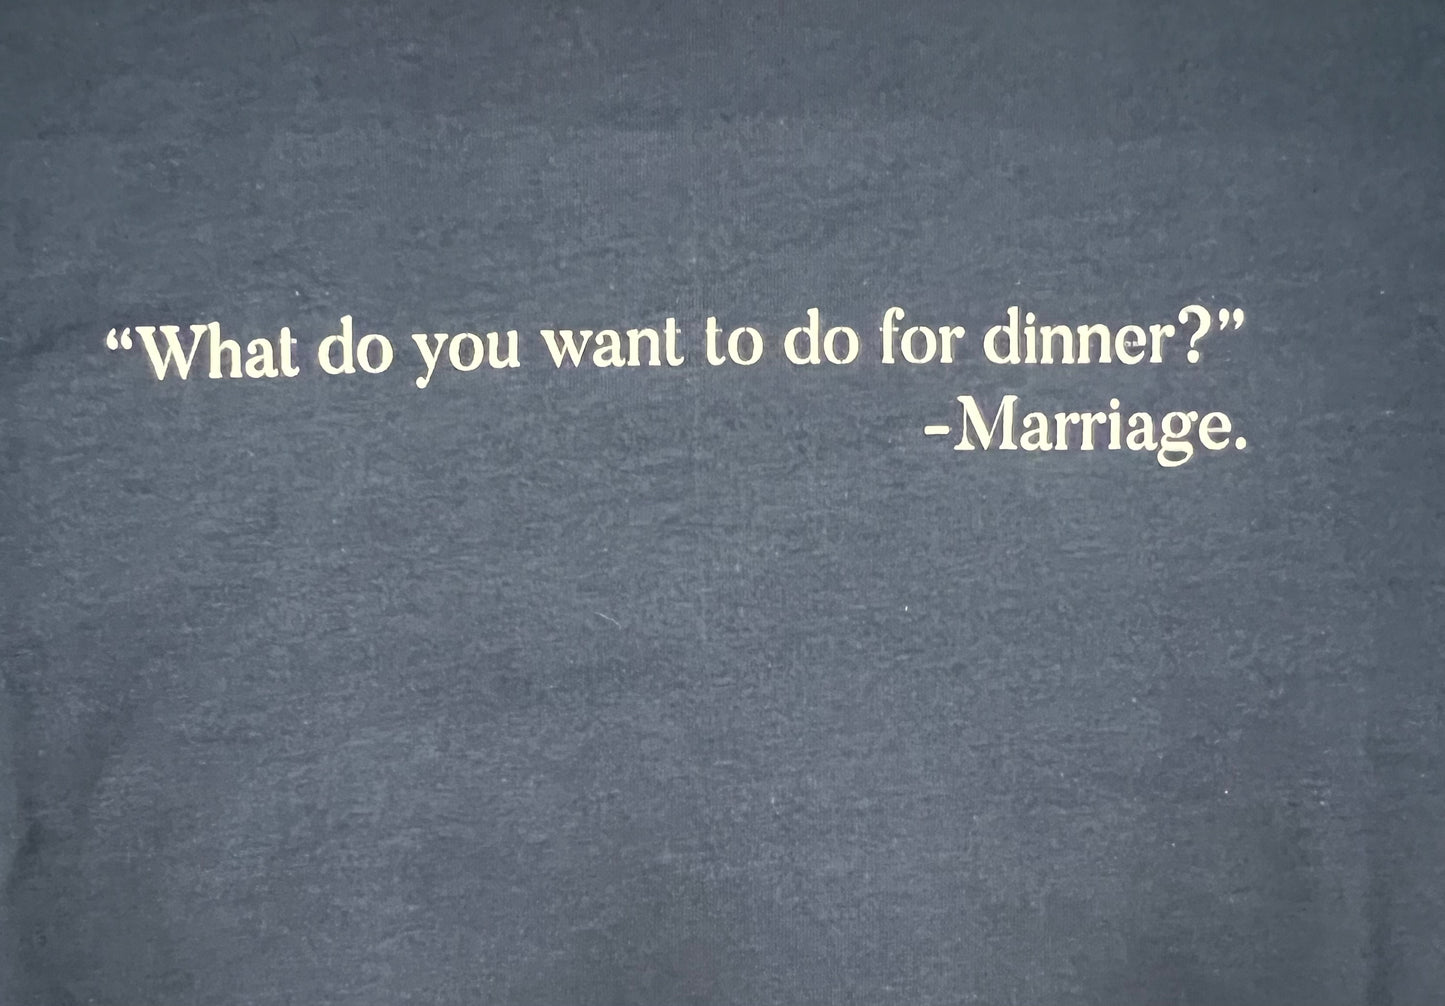 Marriage "what should we do for dinner?" T Shirt (navy)